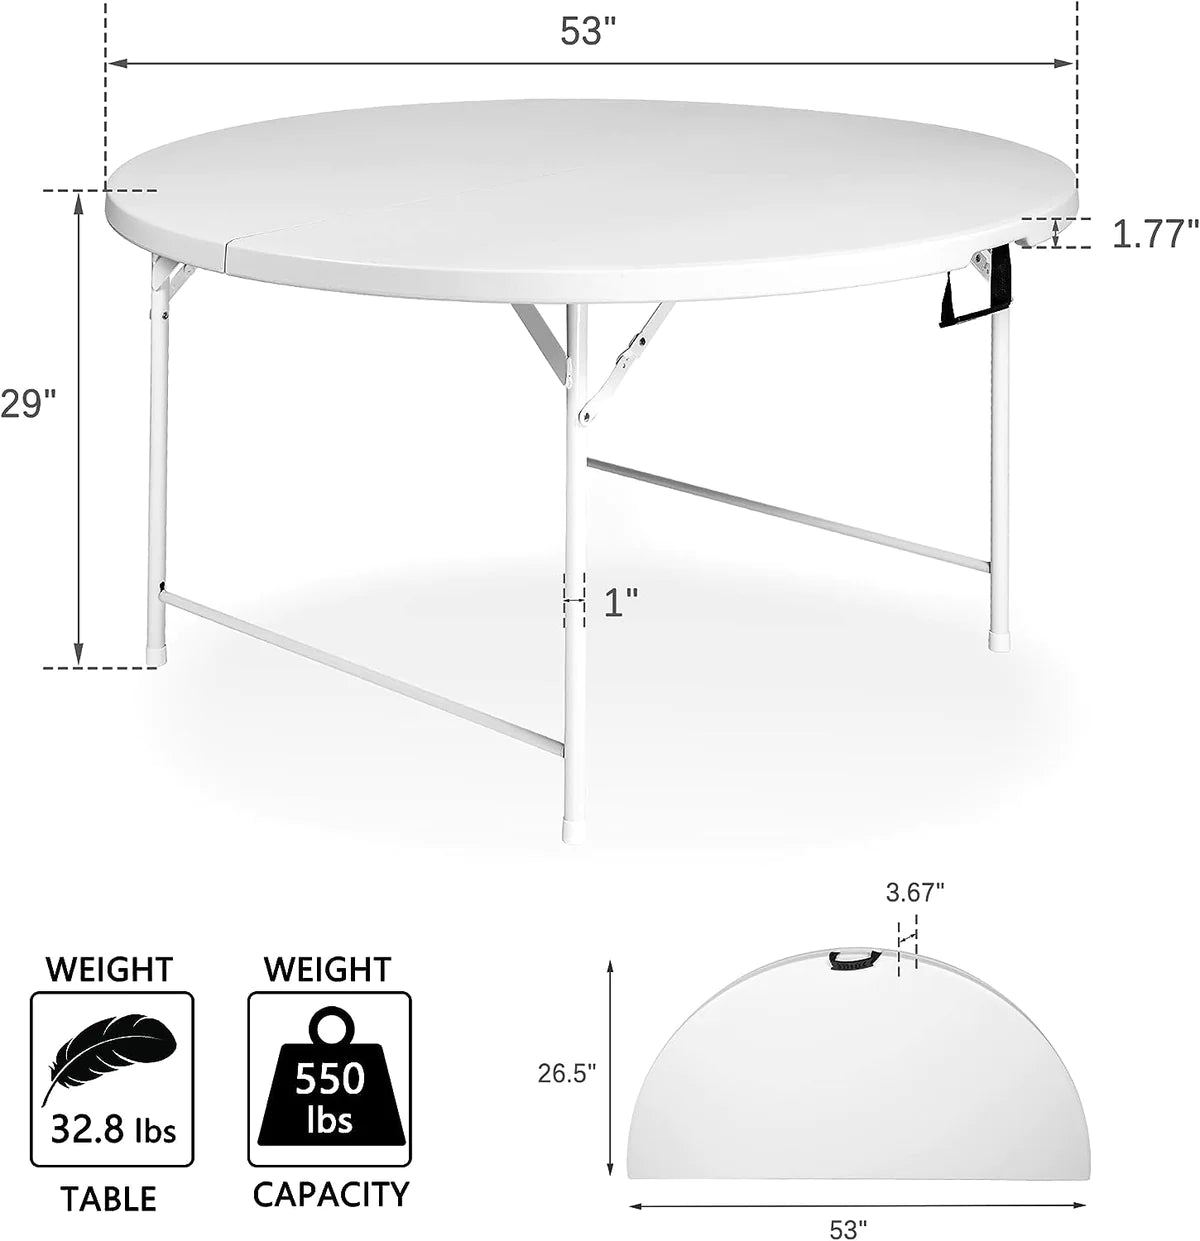 Plastic Tabletop Folding Portable Outdoor Picnic Table, Round, White